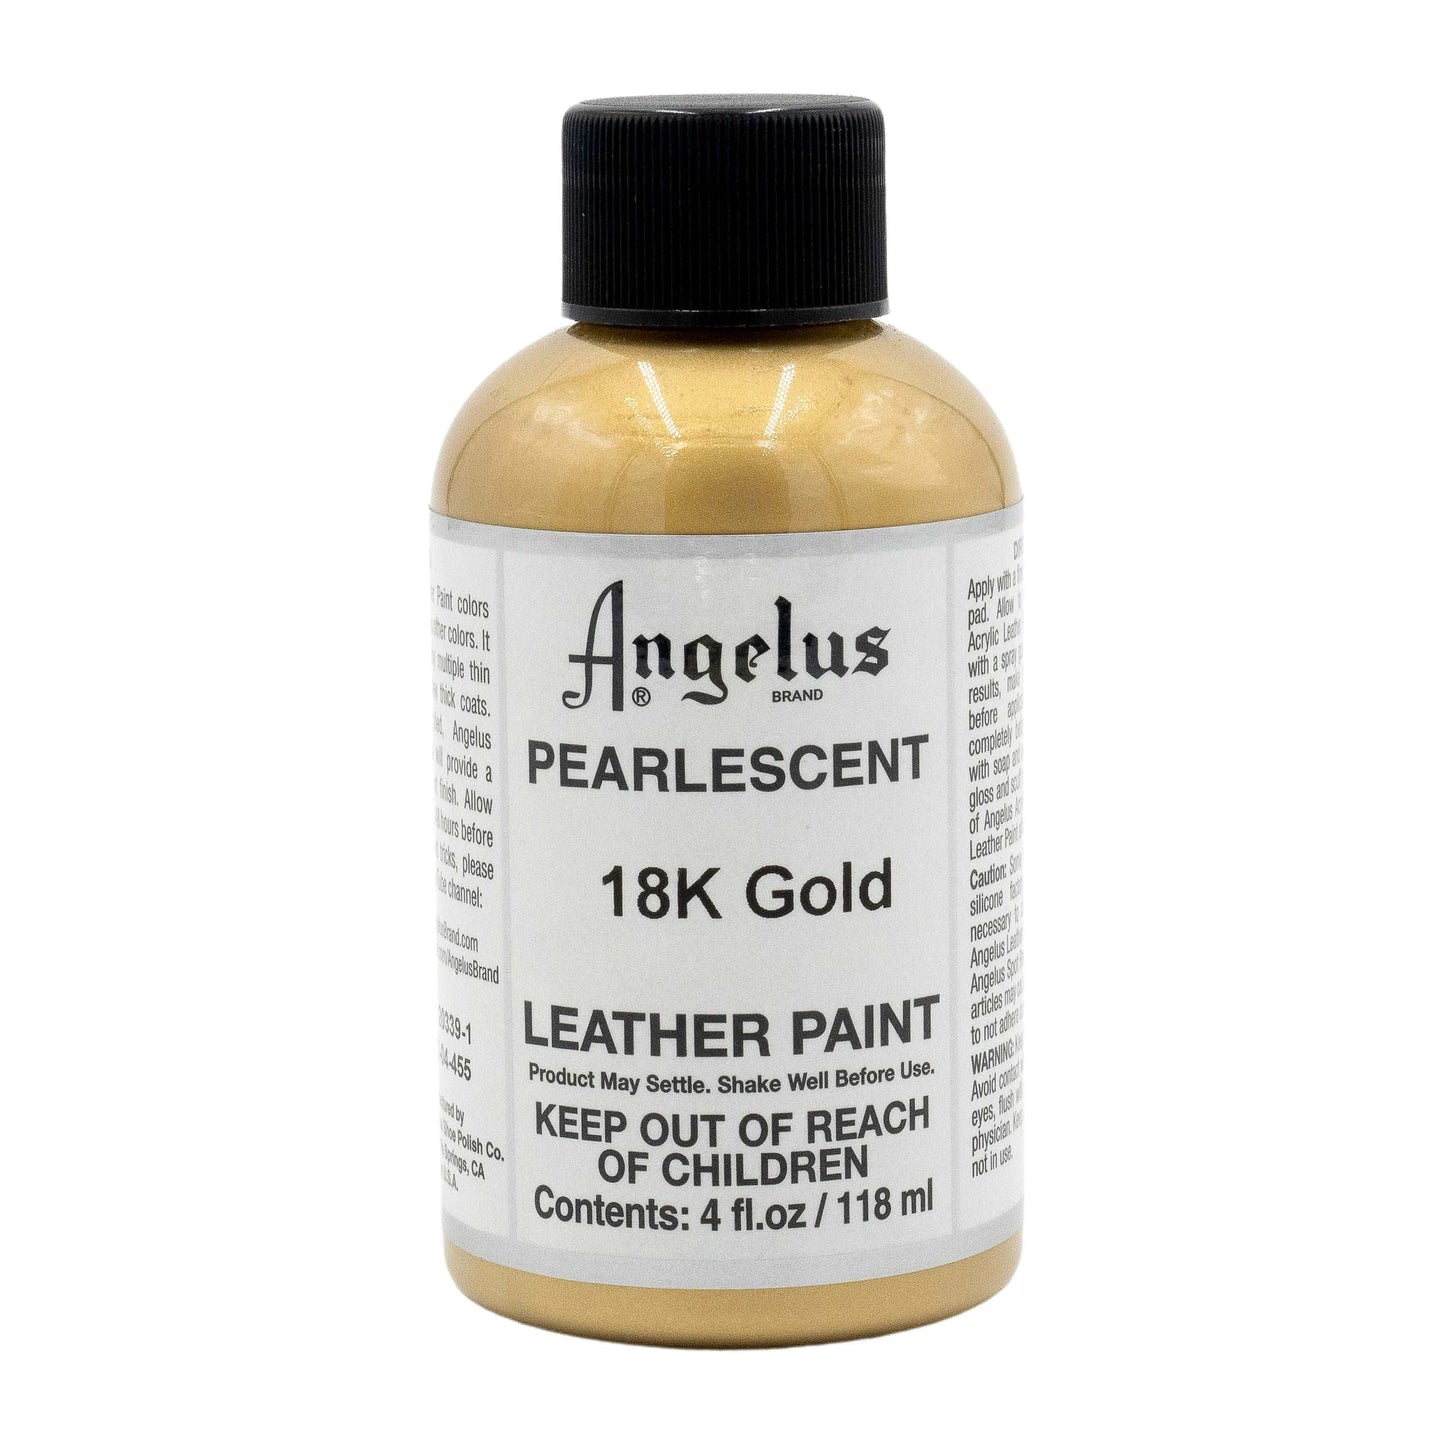 ANGELUS Acrylic Leather Paint 18K Gold Pearlescent | Mollies Make And Create NZ